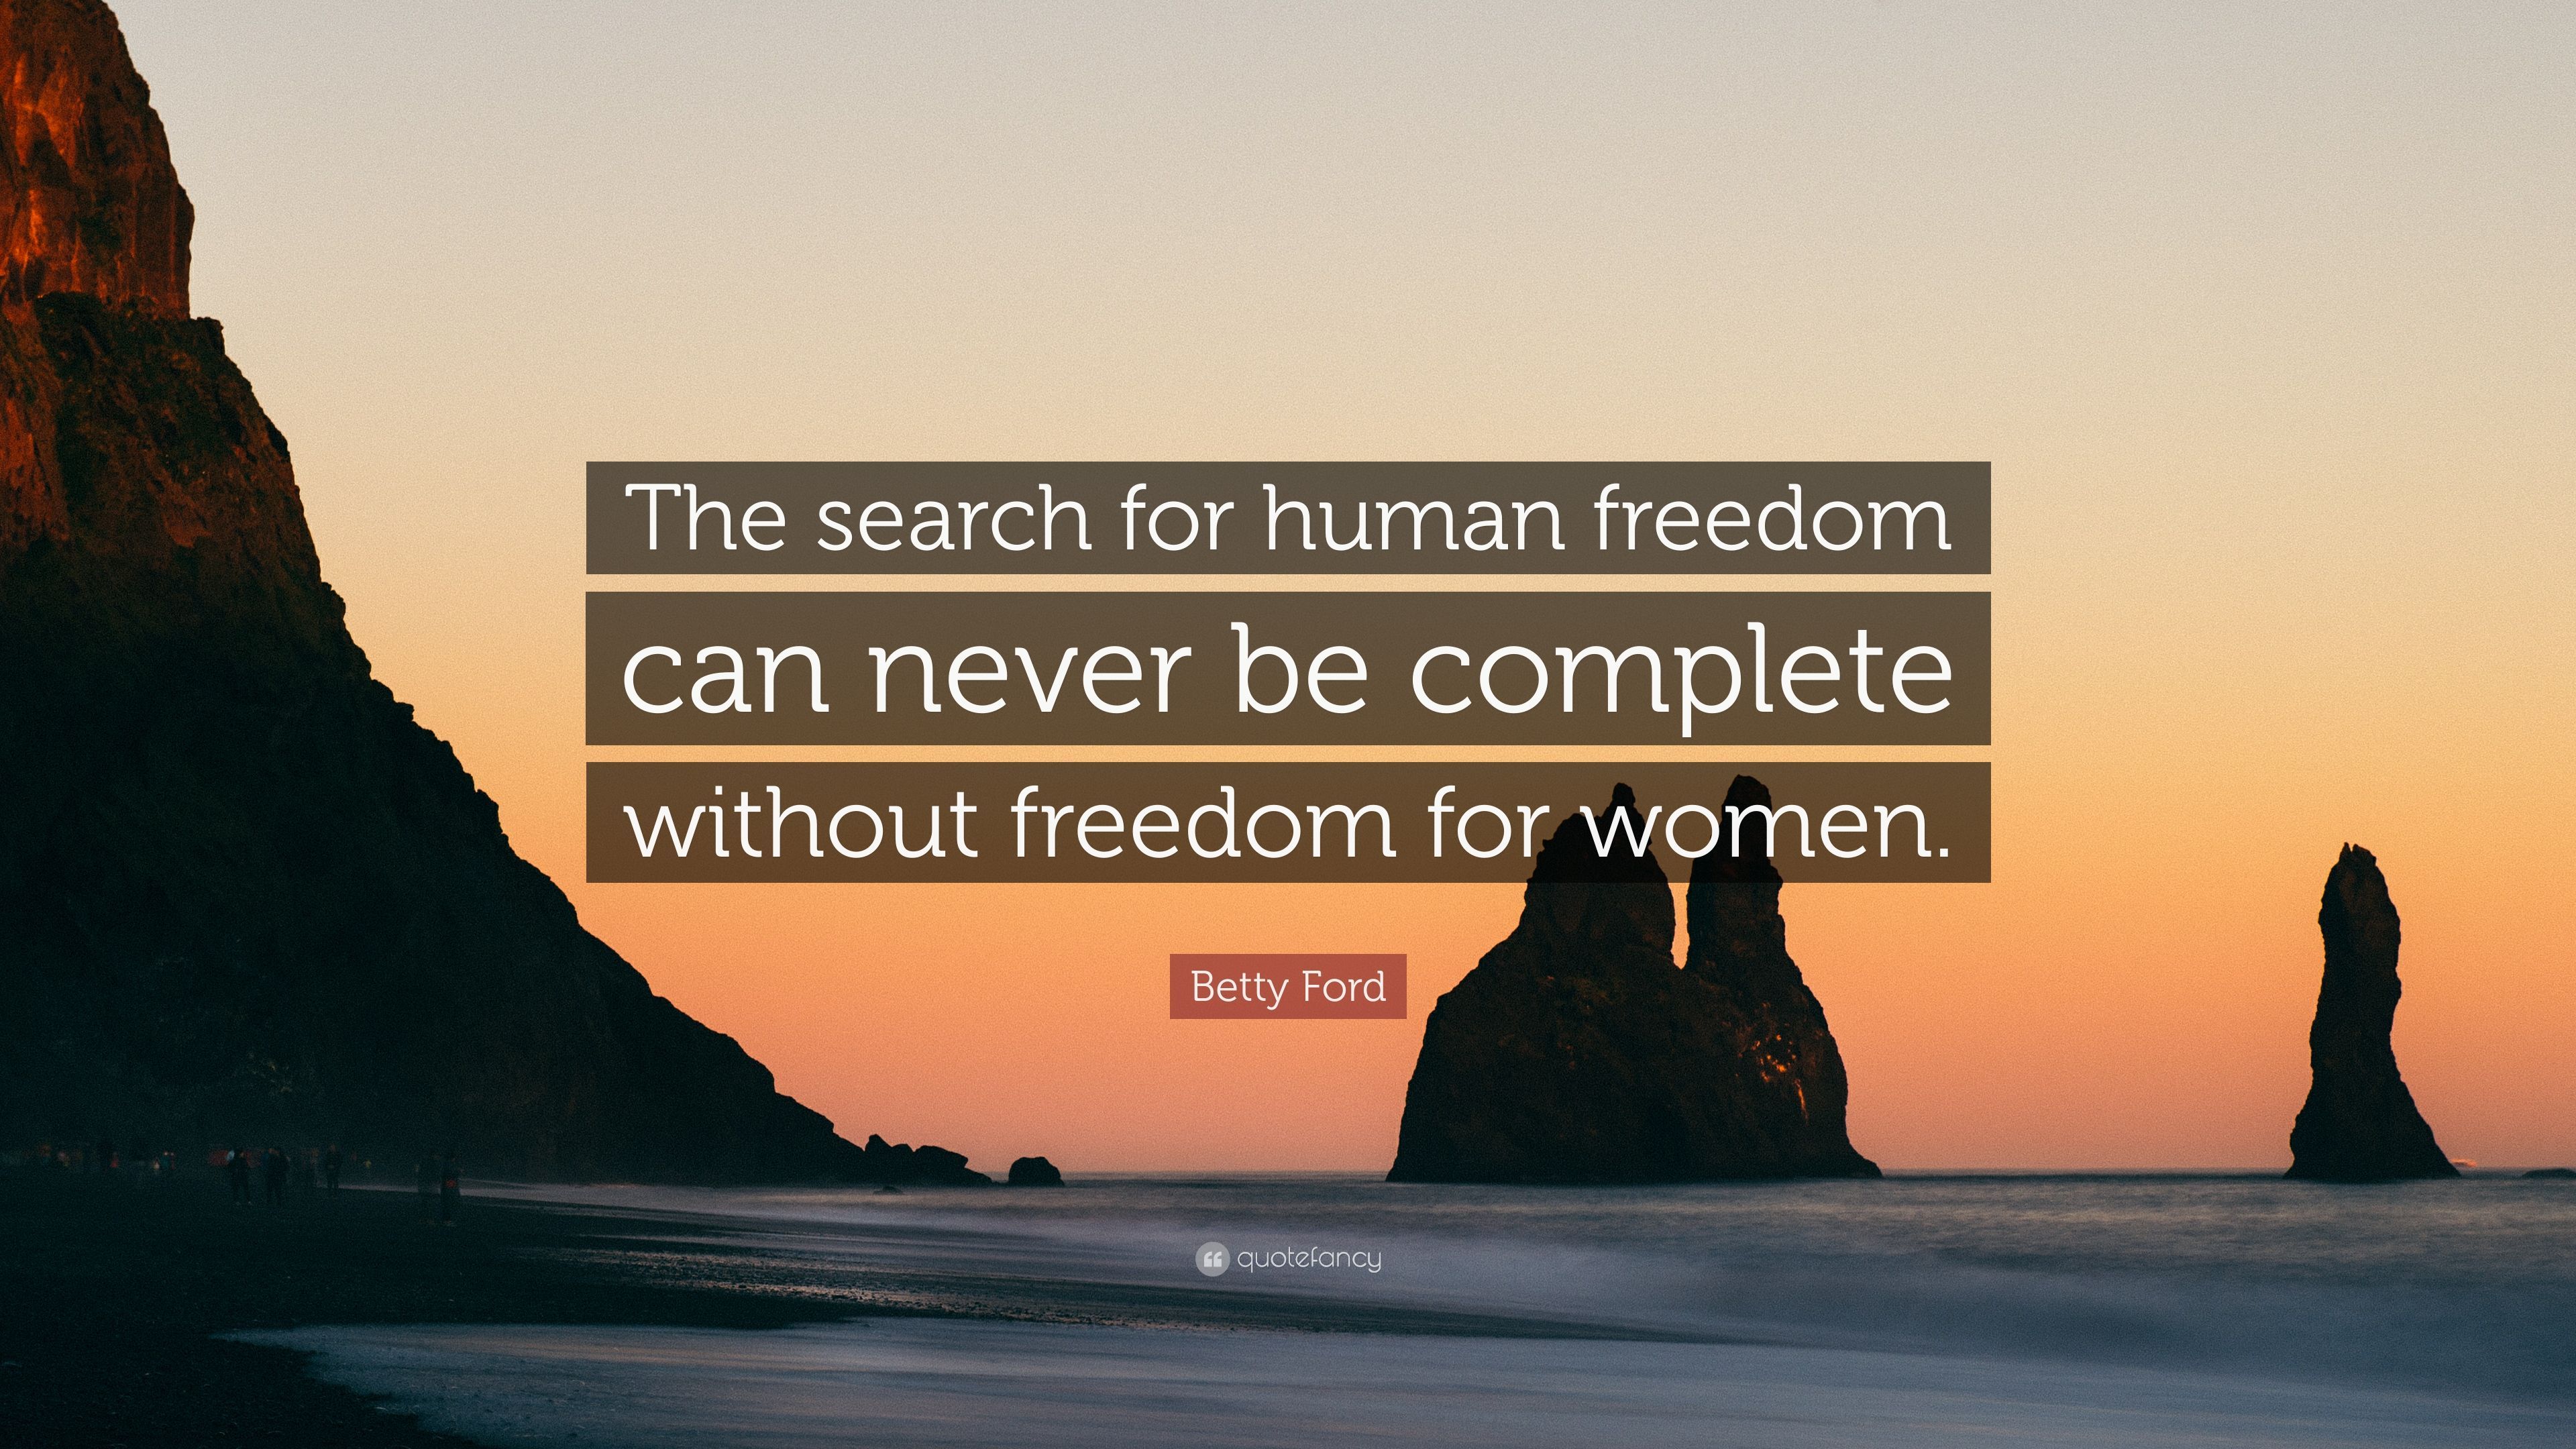 Betty Ford Quote: “The search for human freedom can never be